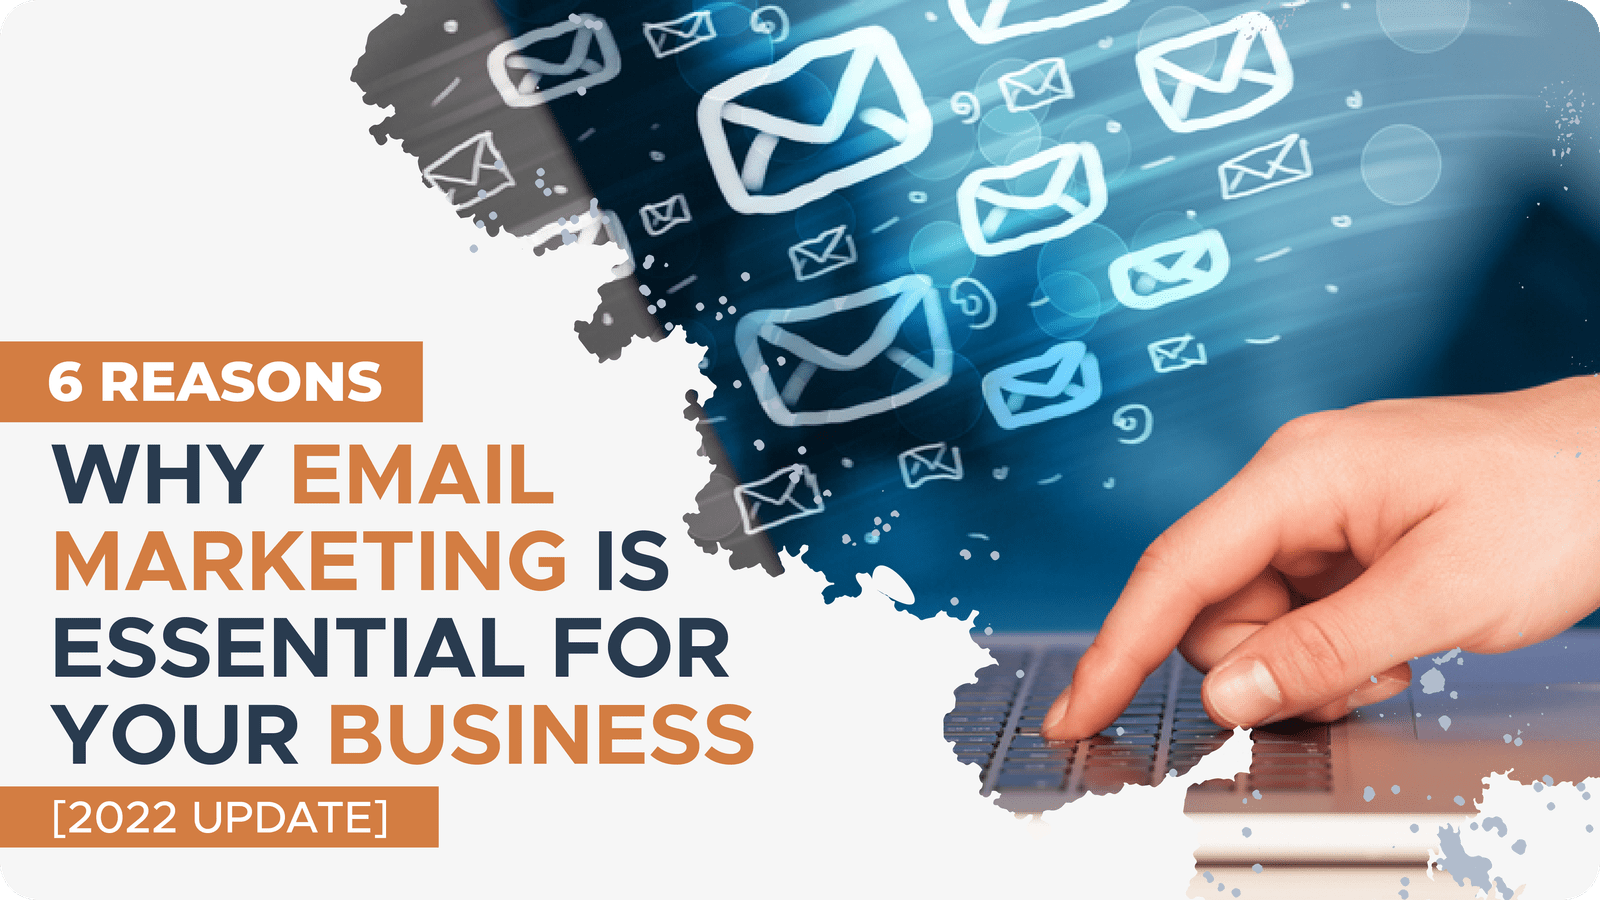 Email-Marketing-1